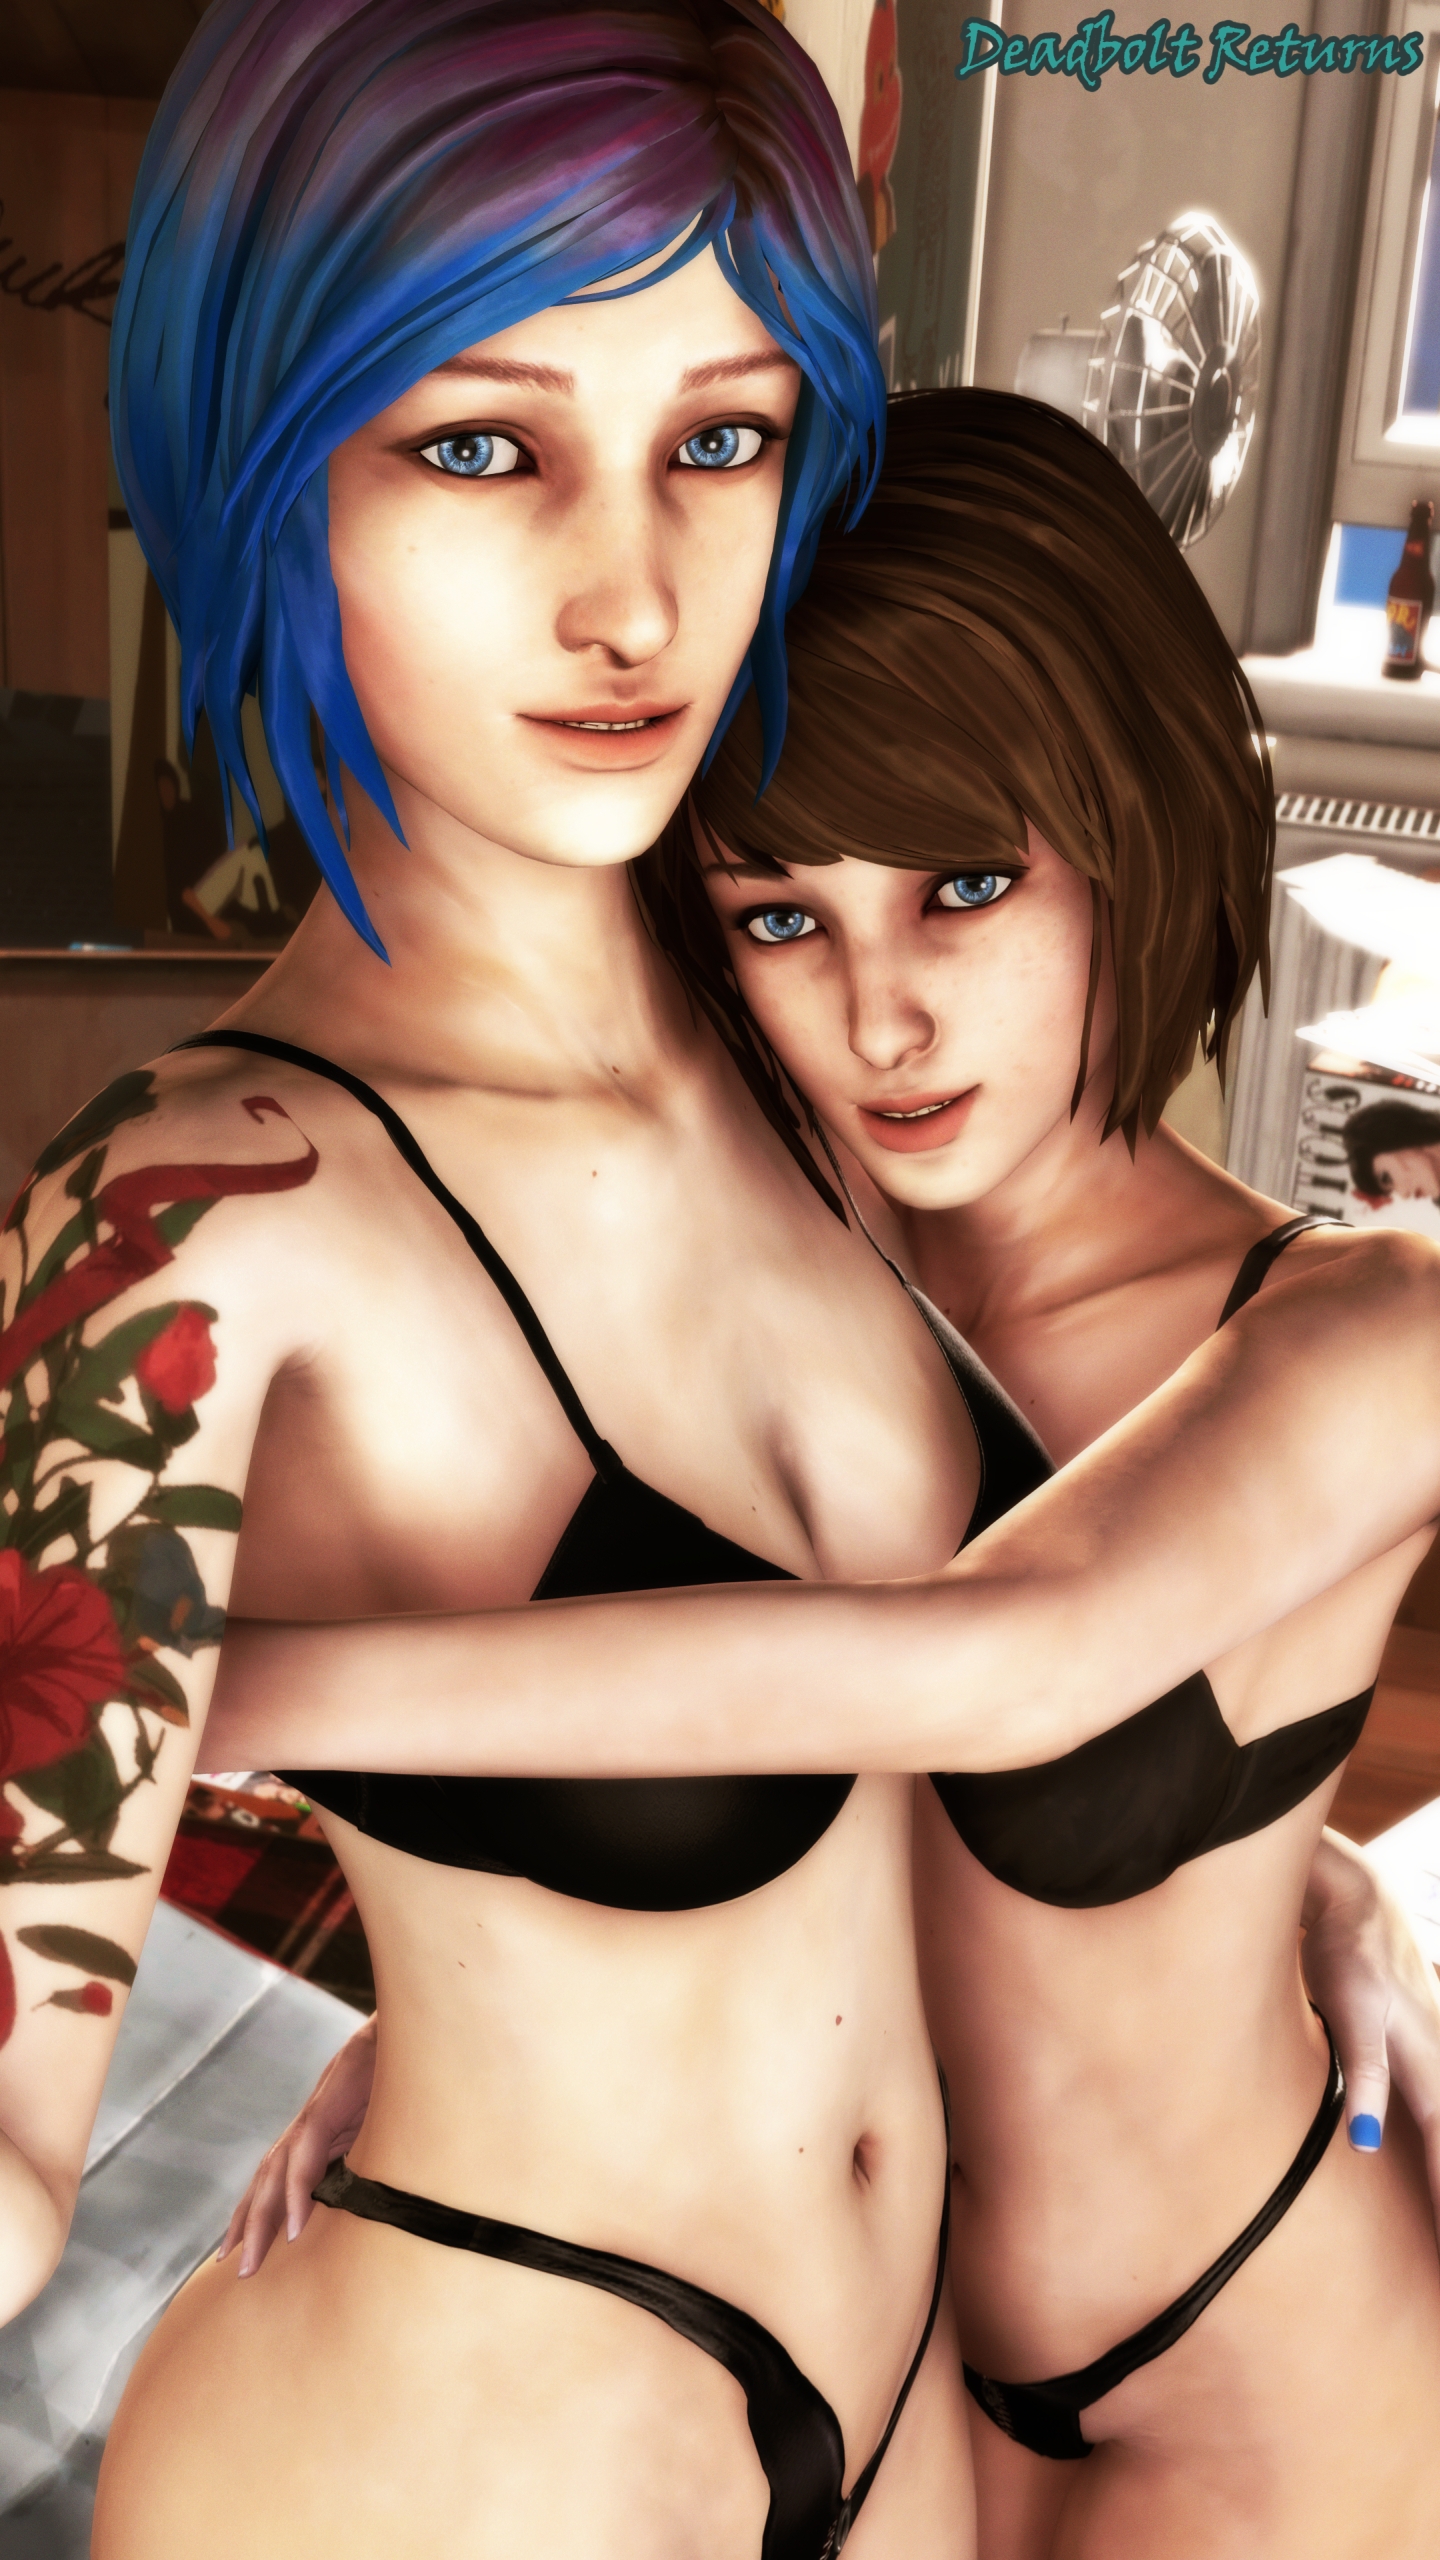 Max Caulfield and Chloe Price Selfie Threesome Max Caulfield Chloe Price Life Is Strange Life Is Strange Max Sfm Source Filmmaker Rule34 Rule 34 Nsfw 3dnsfw 3d Porn Threesome 8